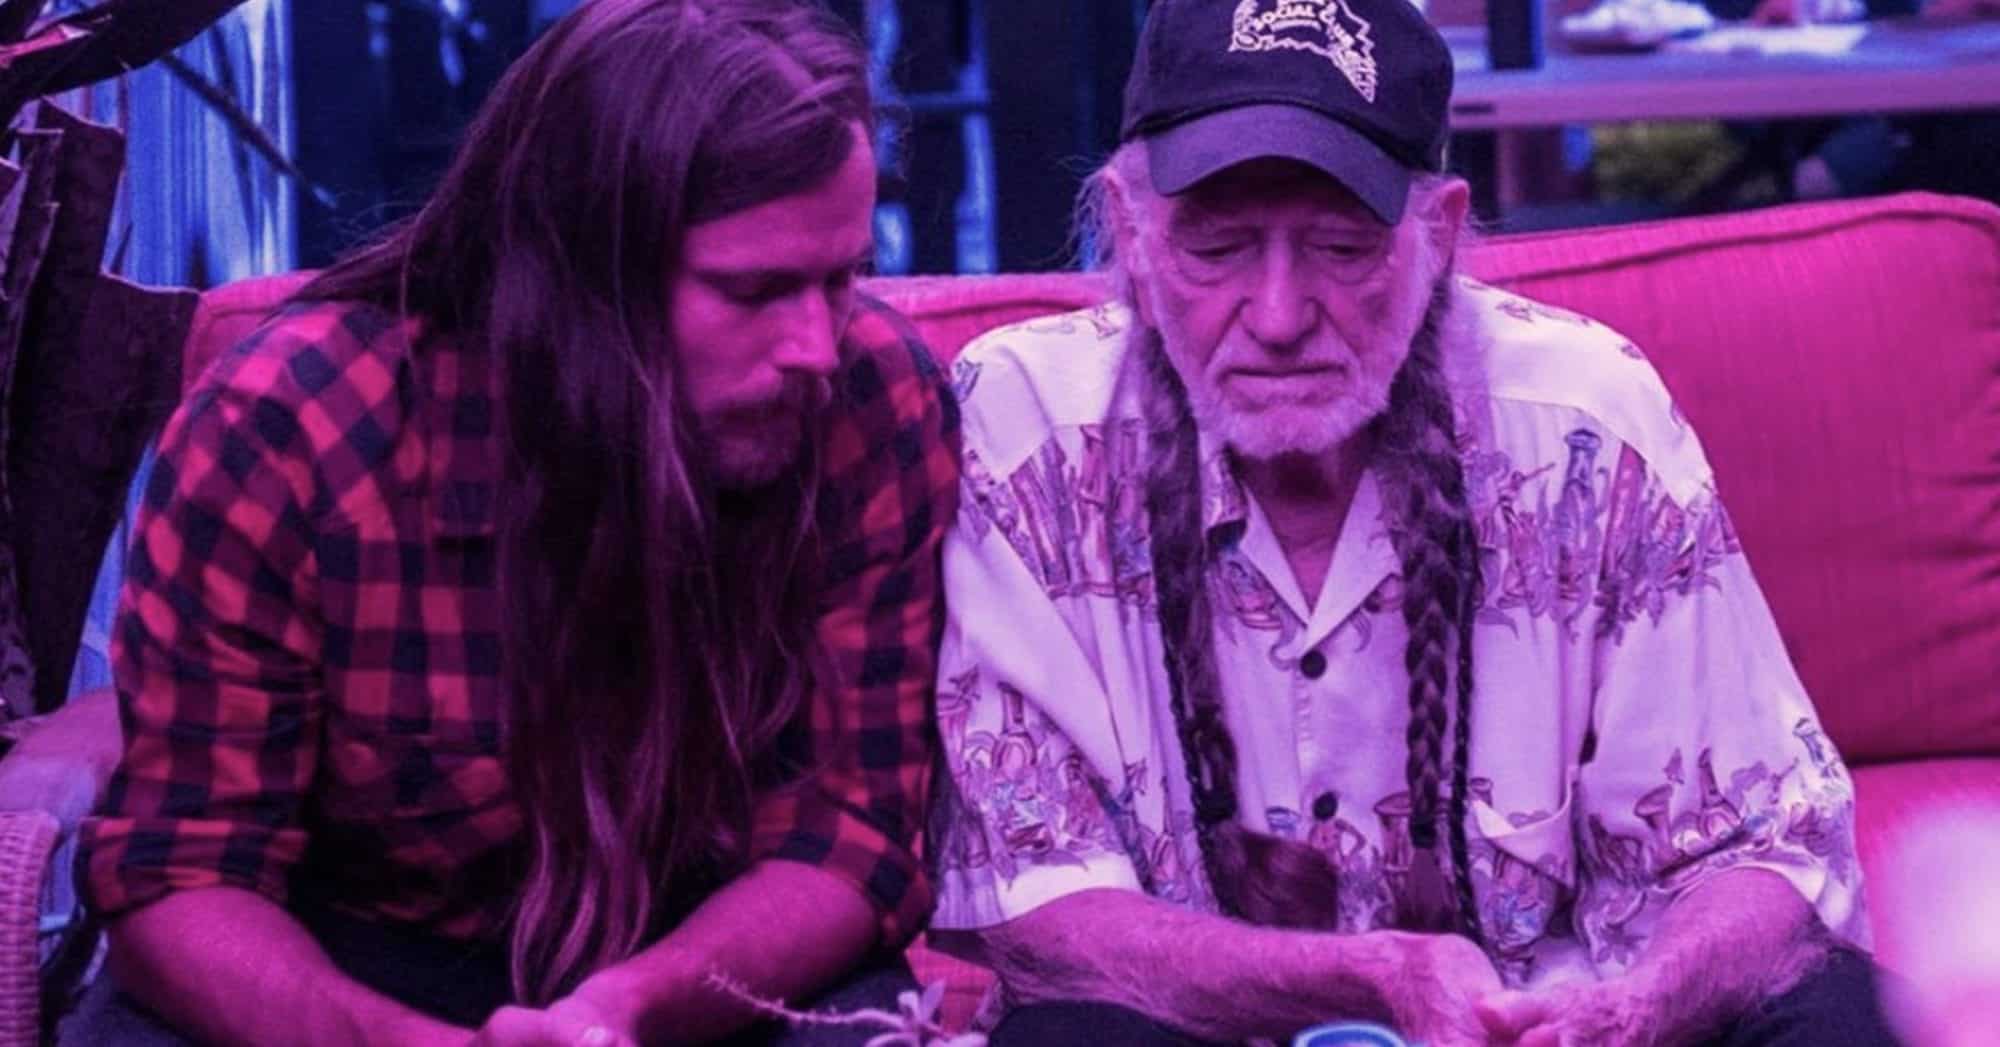 lukas nelson and willie nelson